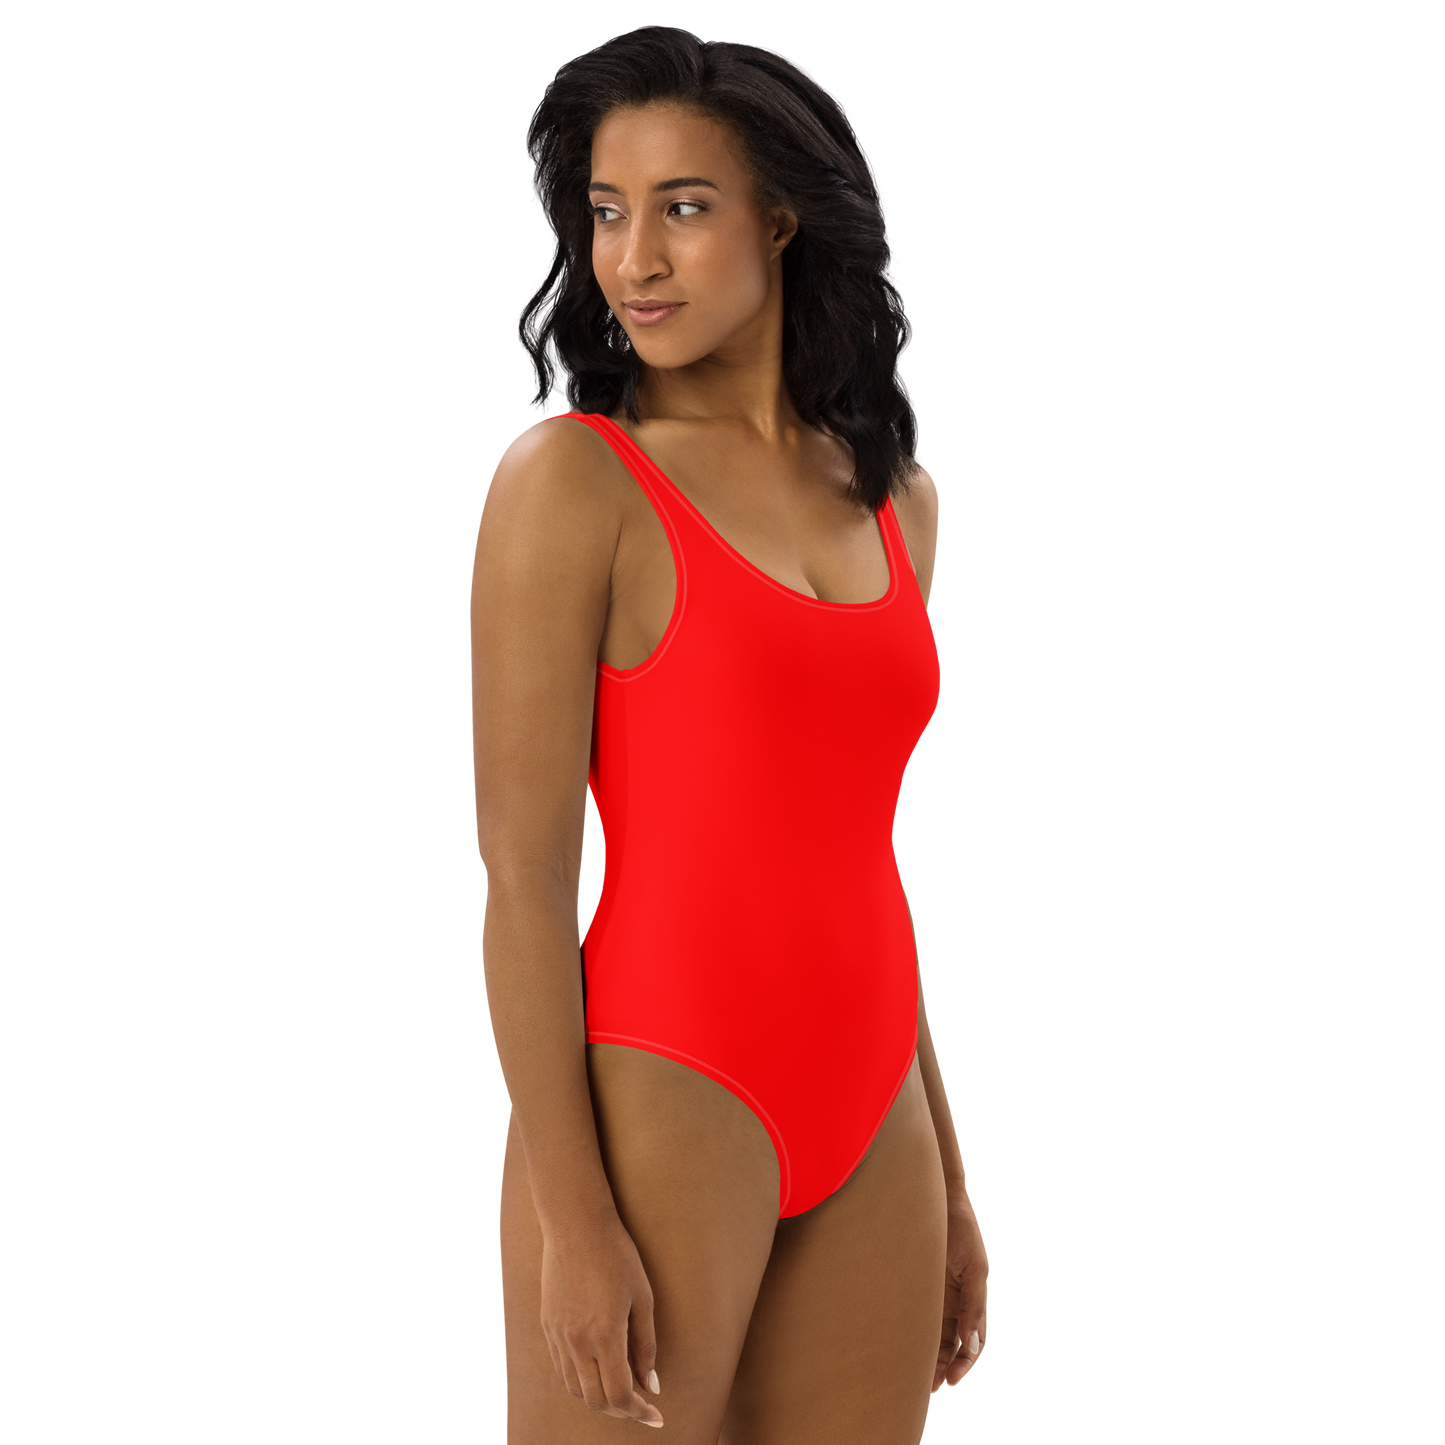 Lifeguard Red One-Piece Swimsuit